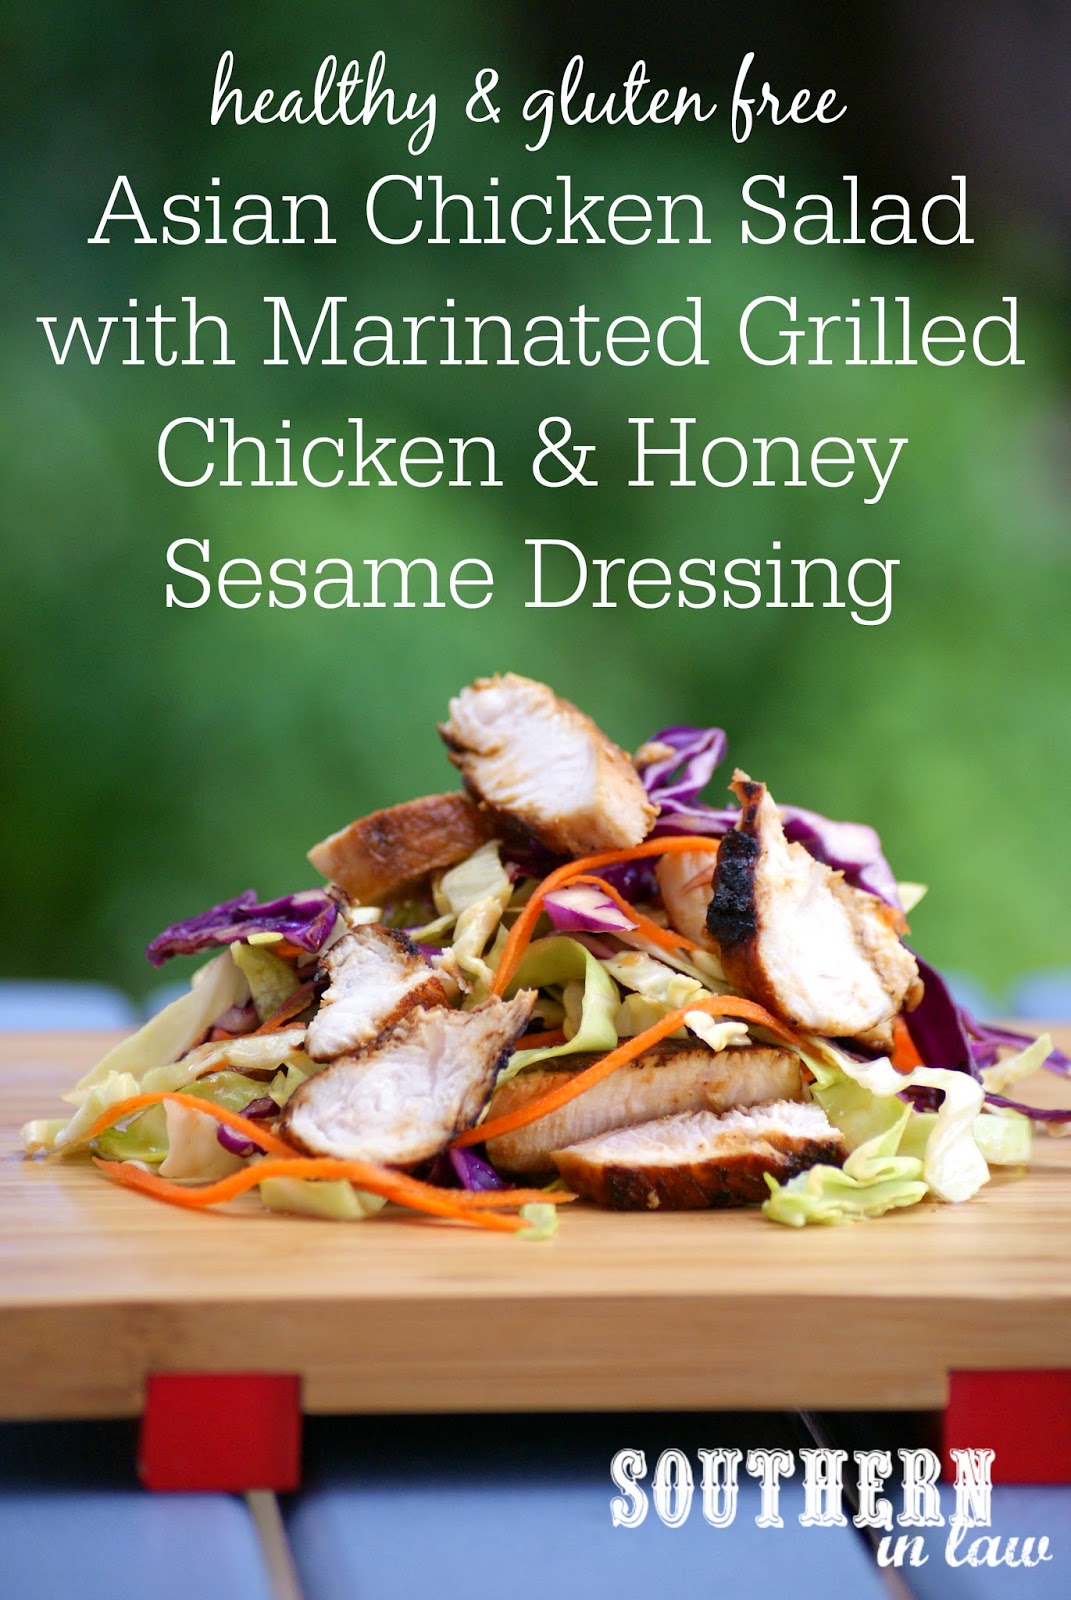 Healthy Asian Chicken Salad with Marinated Chicken Breast and Honey Sesame Dressing Recipe - low fat, gluten free, clean eating friendly, grain free, paleo